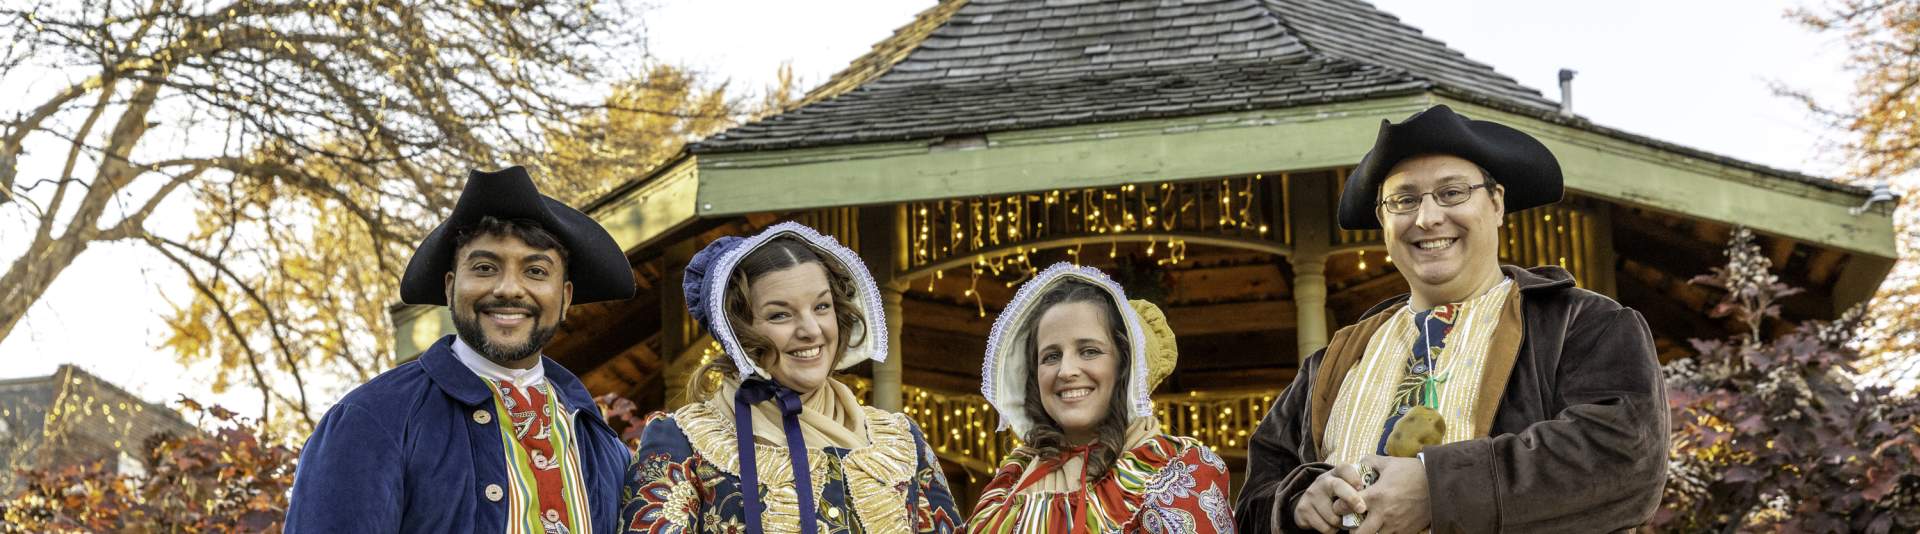 Discover the Enchanting Christmas Traditions in Saint Charles, Missouri